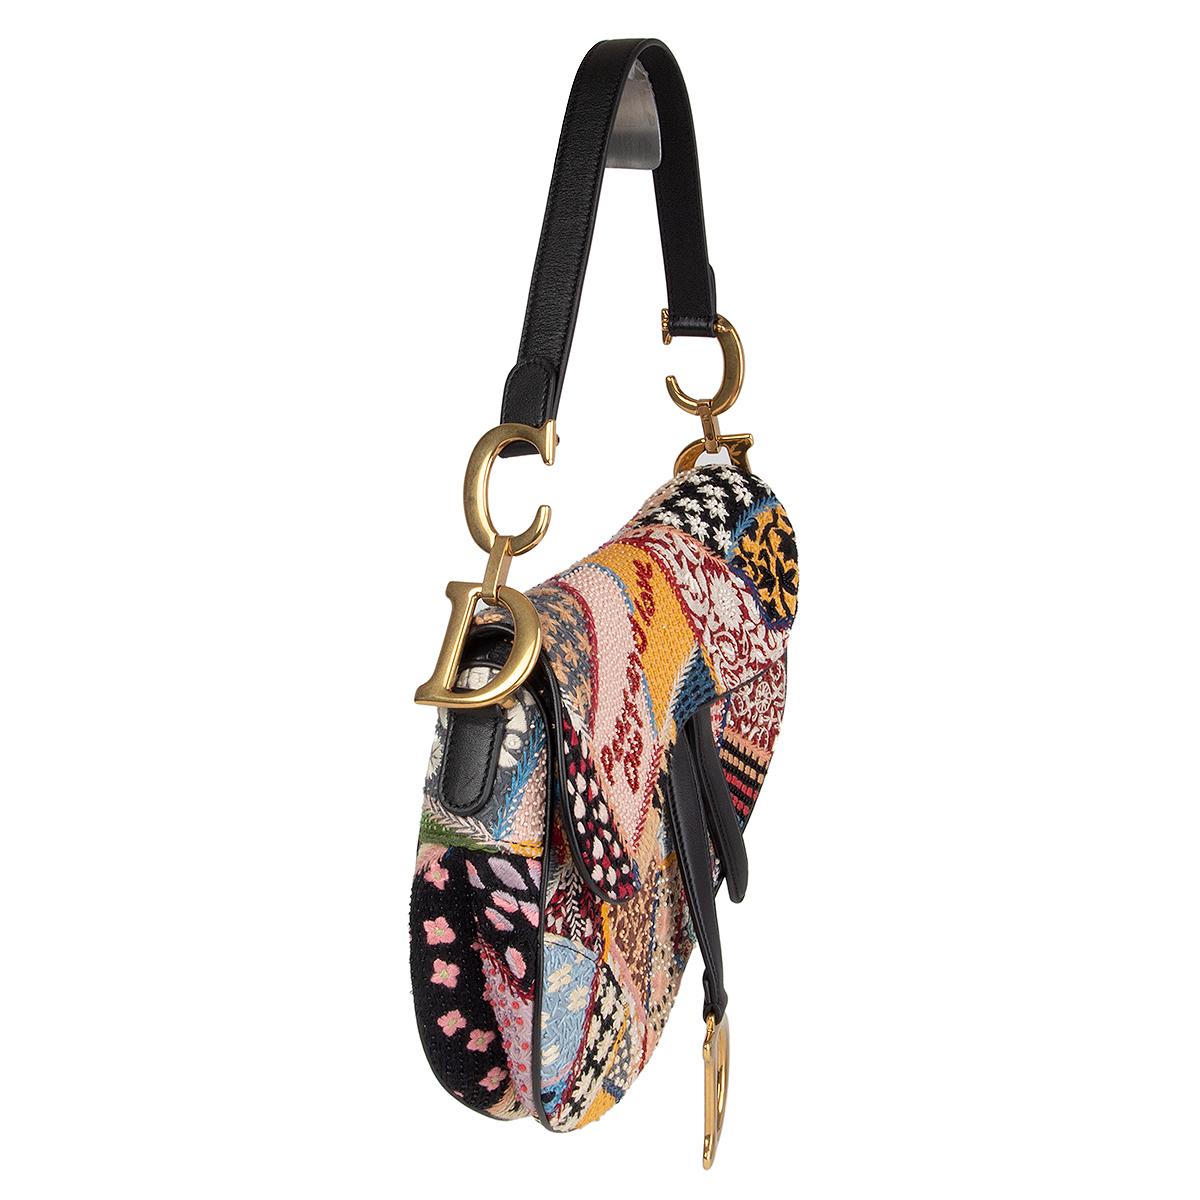 100% authentic Christian Dior 'Peace And Love Saddle' medium bag in multicolor fabric embellished with beads and embroidery featuring slip pocket on the back. Black calfskin shoulder strap front straps and piping. Lined in black suede with one